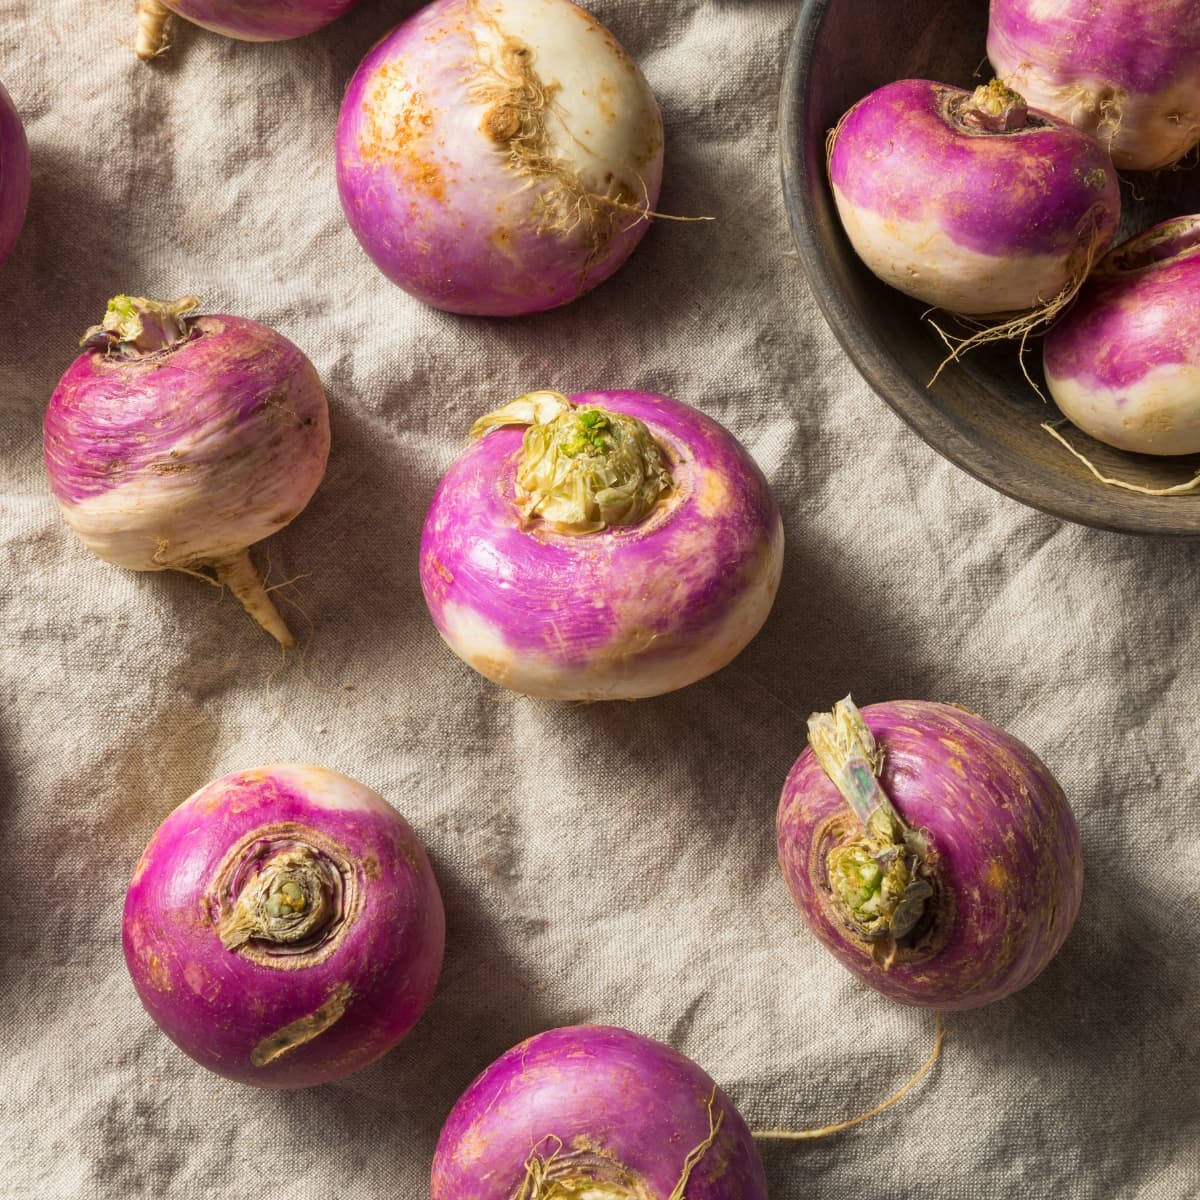 Turnip vs. Rutabaga- What is the Difference? featuring Raw Organic Purple Turnips on a Burlap Cloth